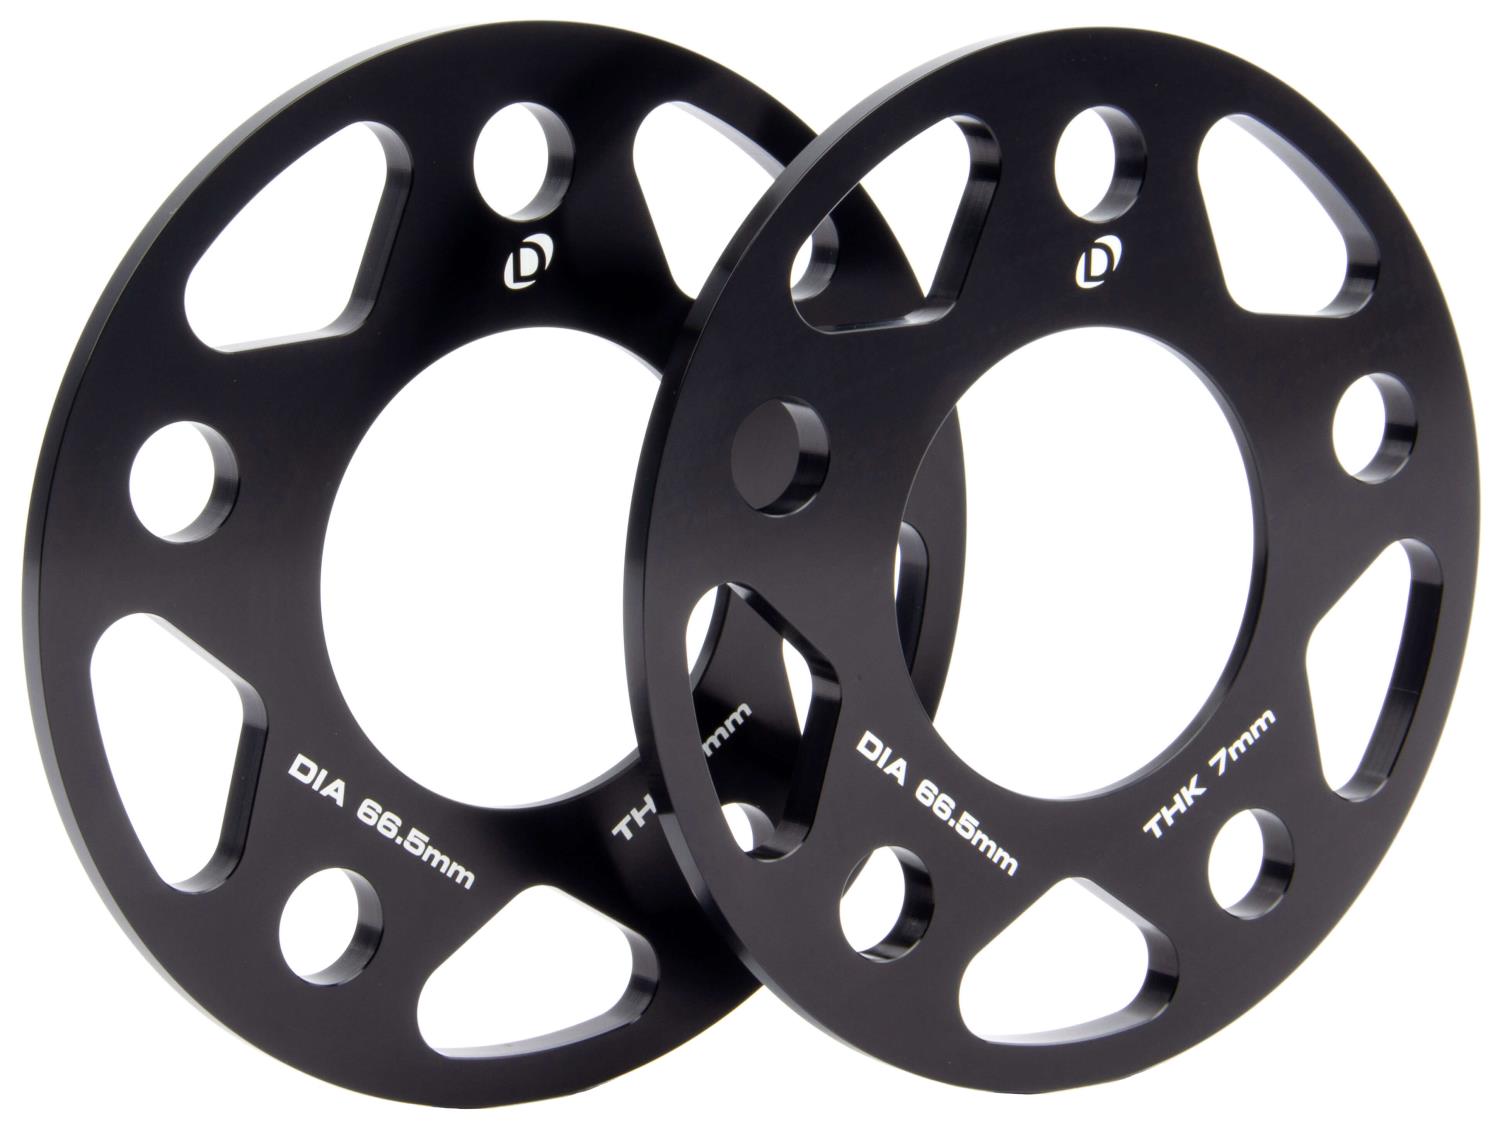 Machined Aluminum Wheel Spacers [7 mm Thick] for Select Late-Model BMW Cars/SUVs, Mini Cooper, Toyota GR Supra  [Black]